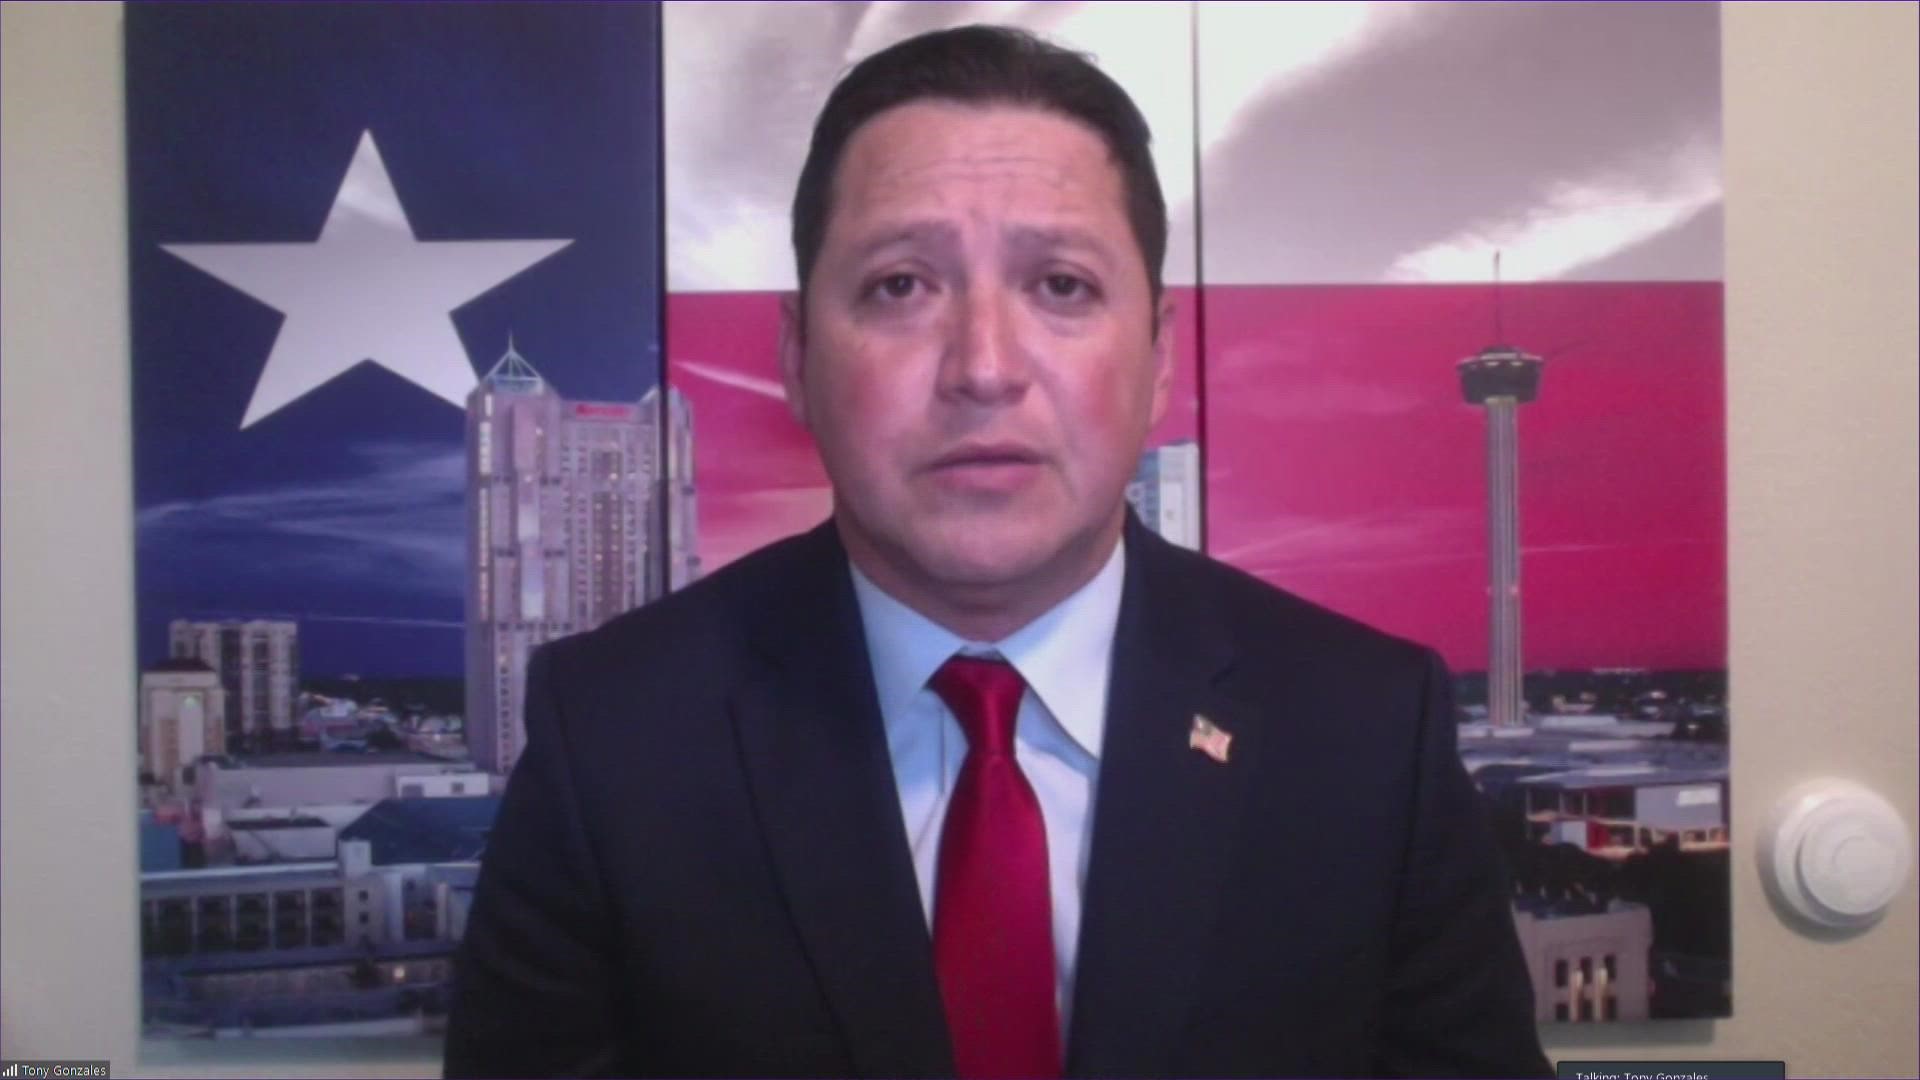 In an interview with KENS 5, the congressman didn't say directly whether he believes current gun laws contribute to mass shootings like the one in his district.